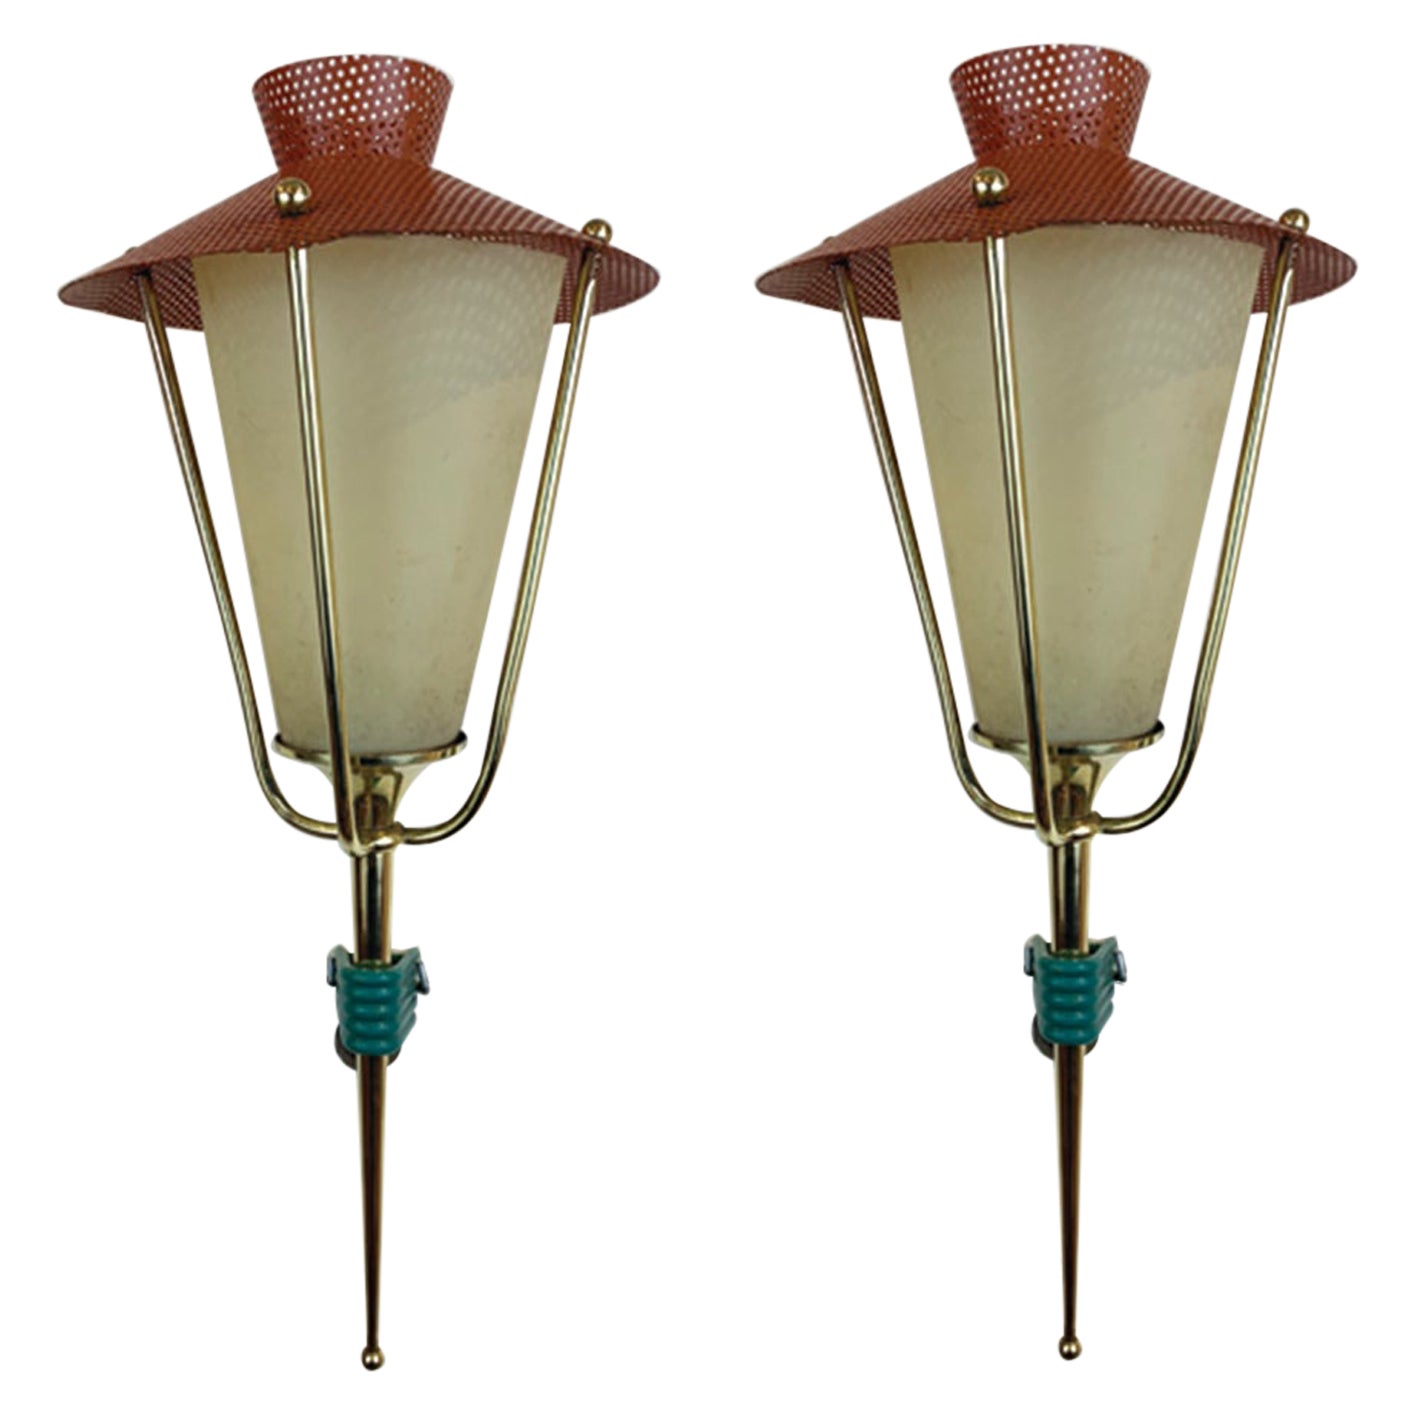 1950's French Lantern Wall Sconces by Arlus